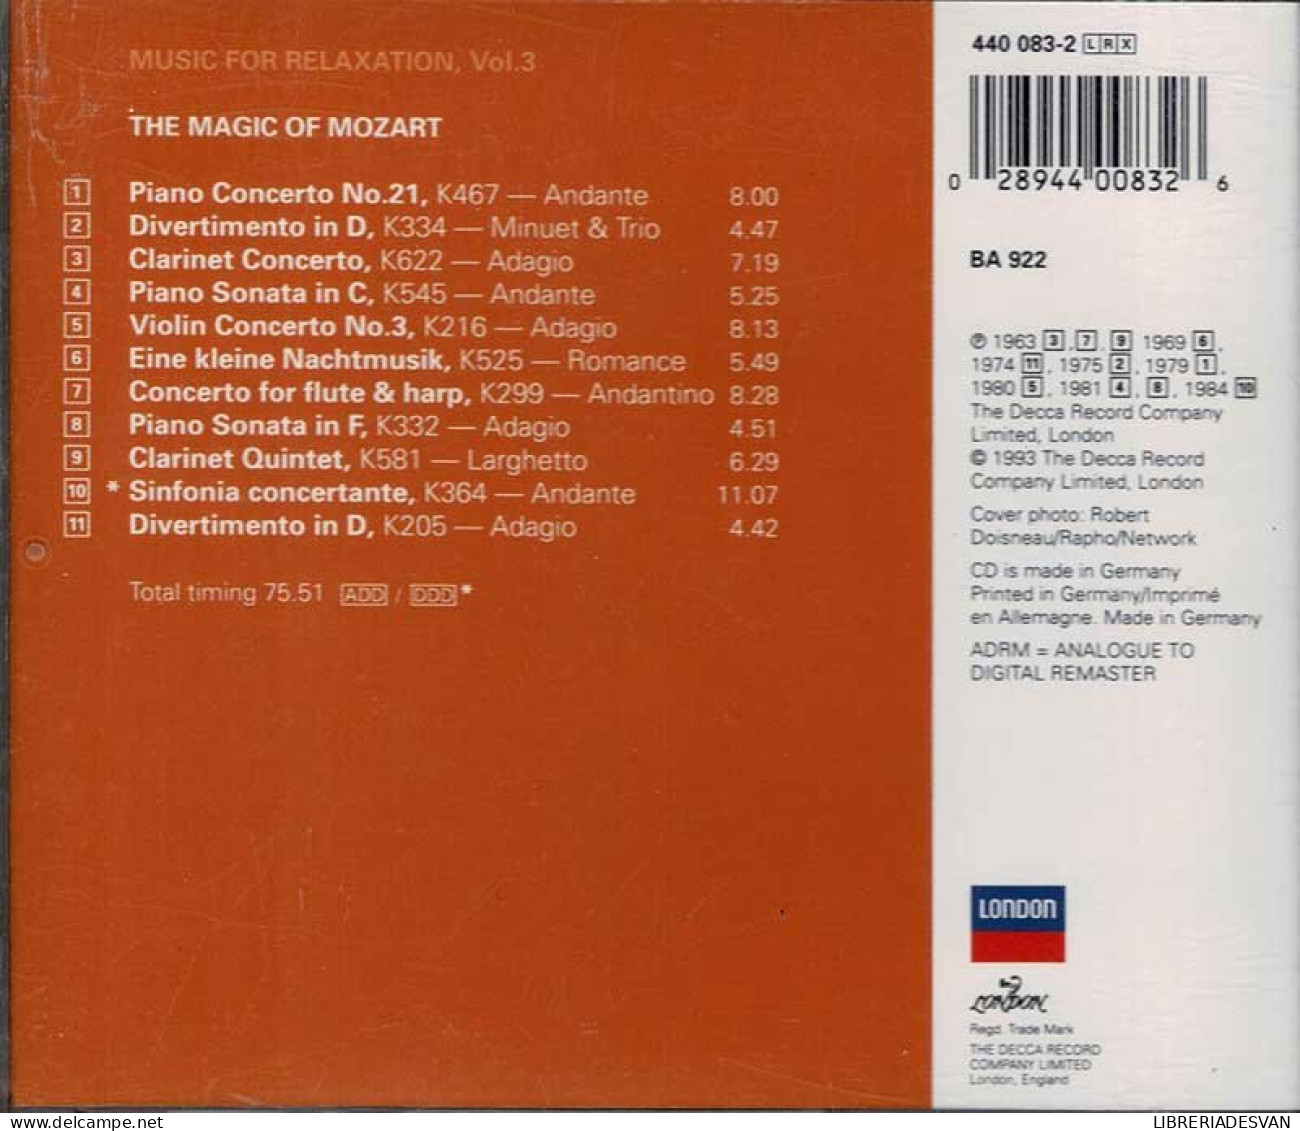 Music For Relaxation, Vol. 3: The Magic Of Mozart. CD - Clásica